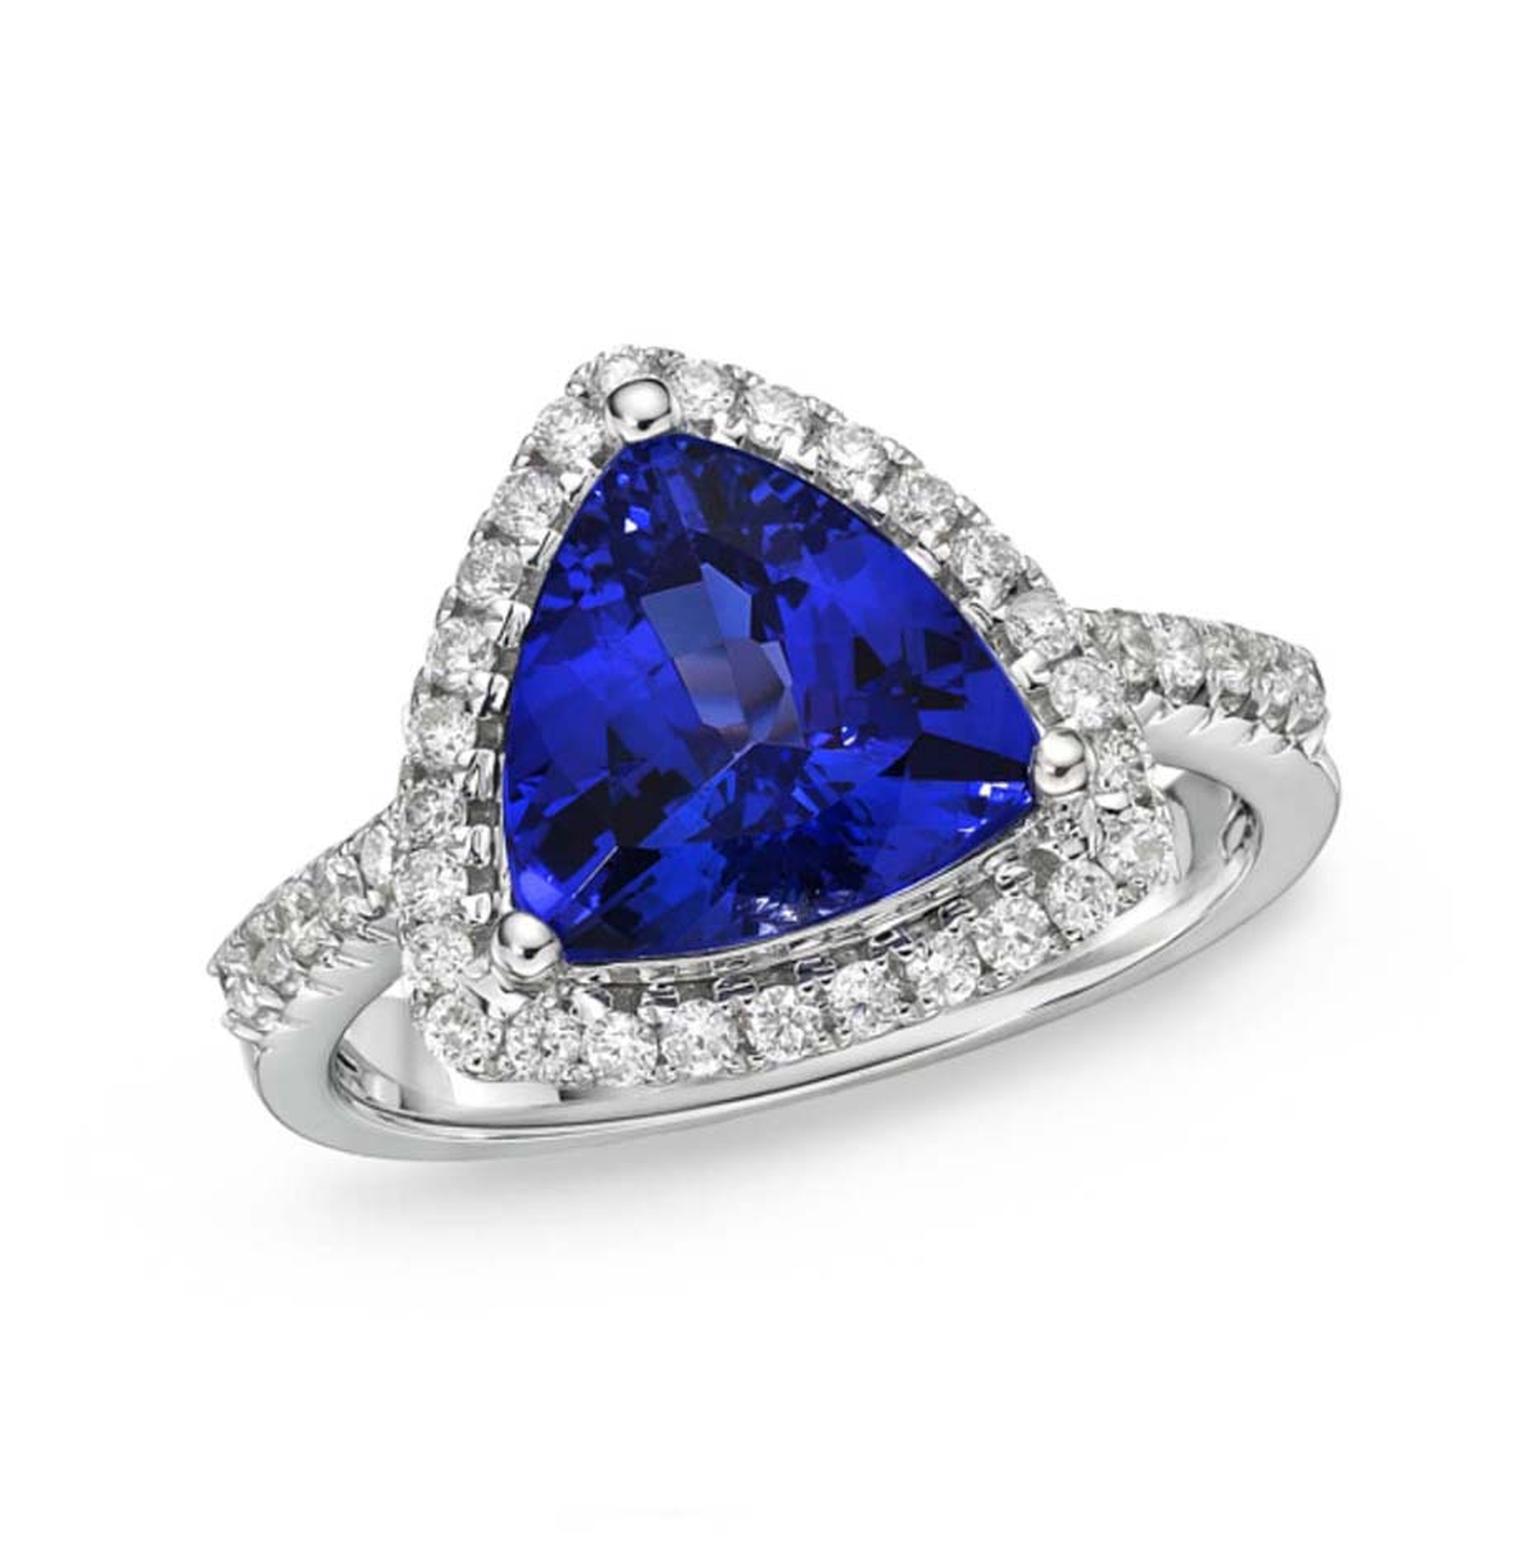 TanzaniteOne tanzanite engagement ring, set with a rich blue-violet 3.40ct tanzanite encirlced by a halo of diamonds, with a reverse tapered band set with diamonds ($3,500).